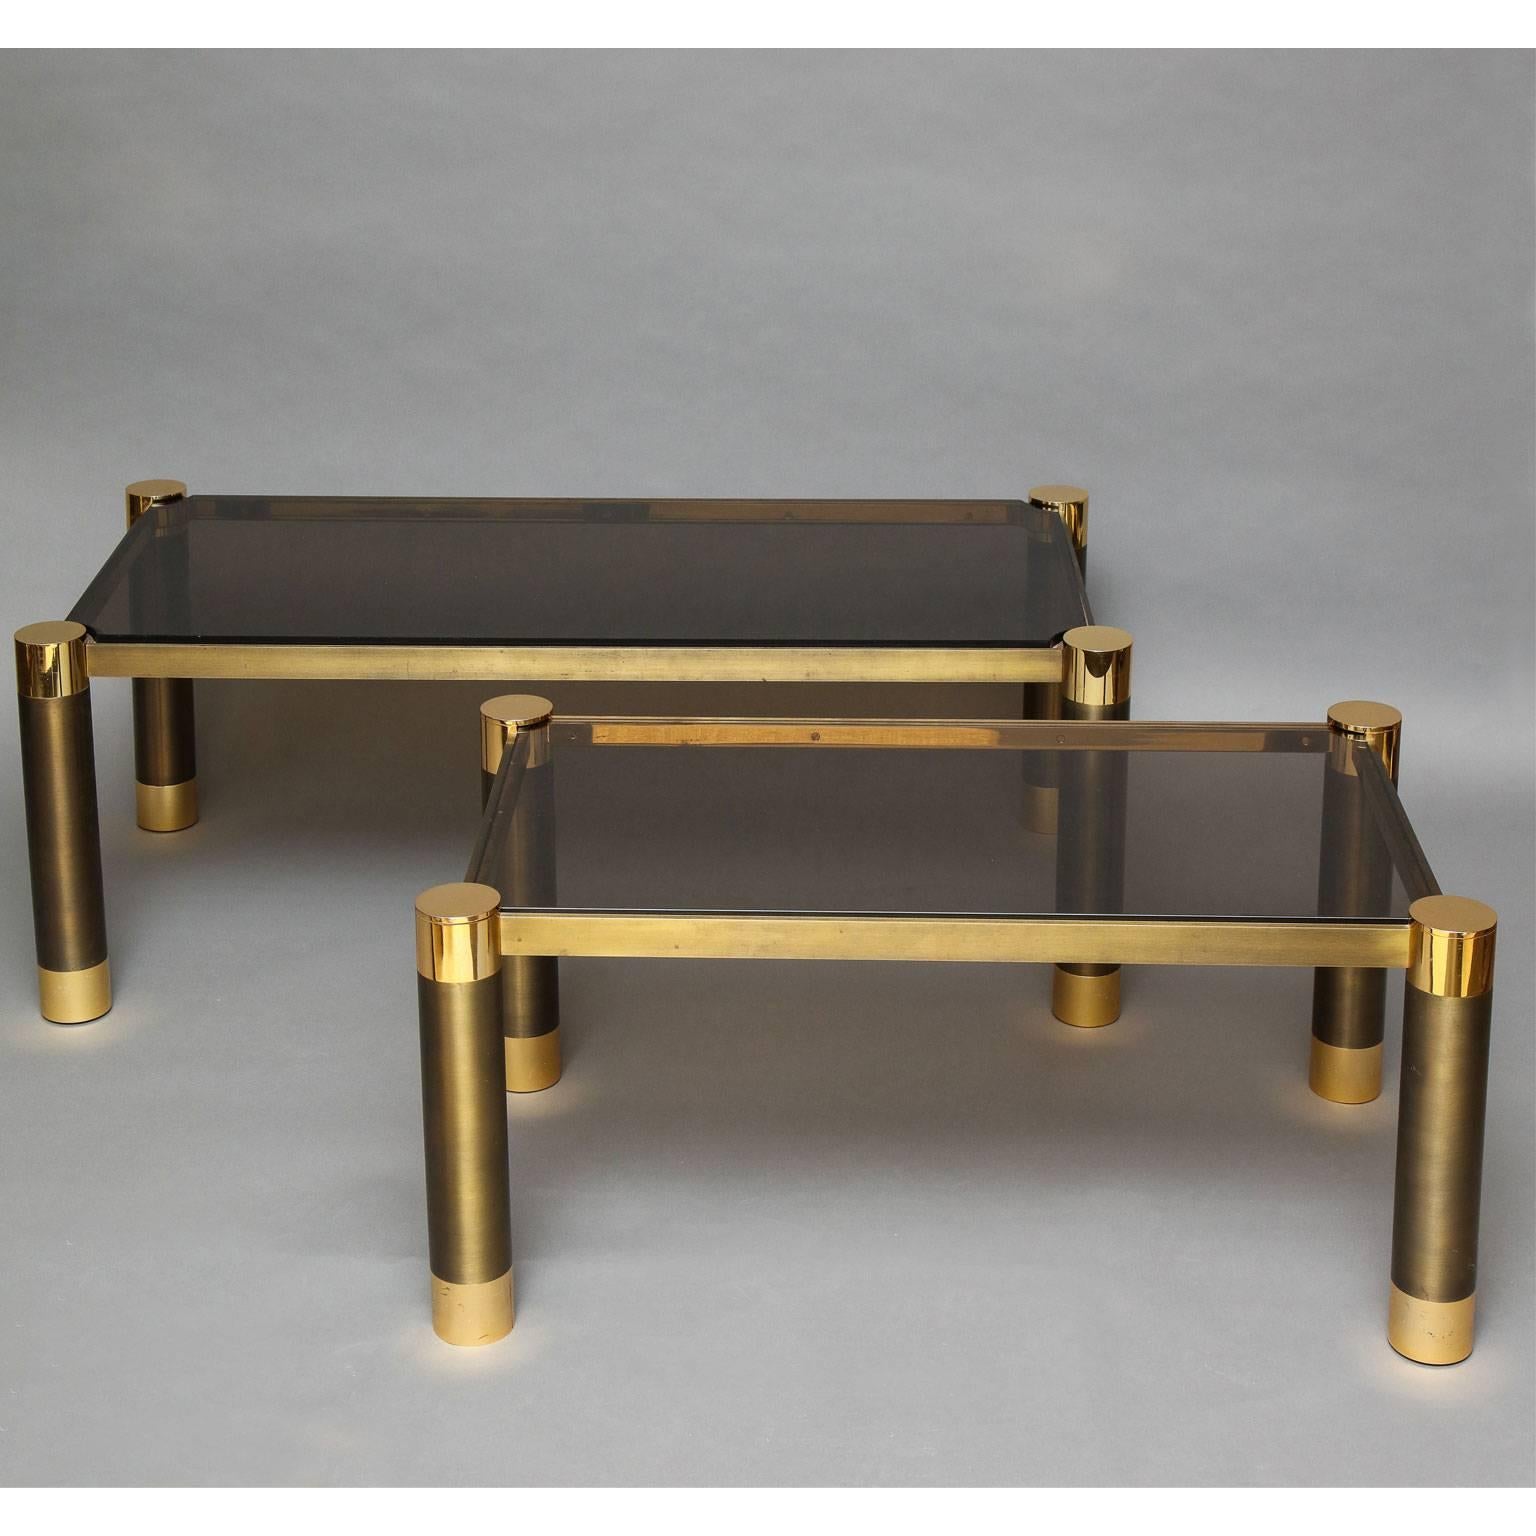 Karl Springer (1931-1991)
Near pair of low tables in brass with smoked glass tops. Brushed antique brass frame raised on column legs with polished brass caps and feet. The smaller table is signed on its short side outside edge. The small table's